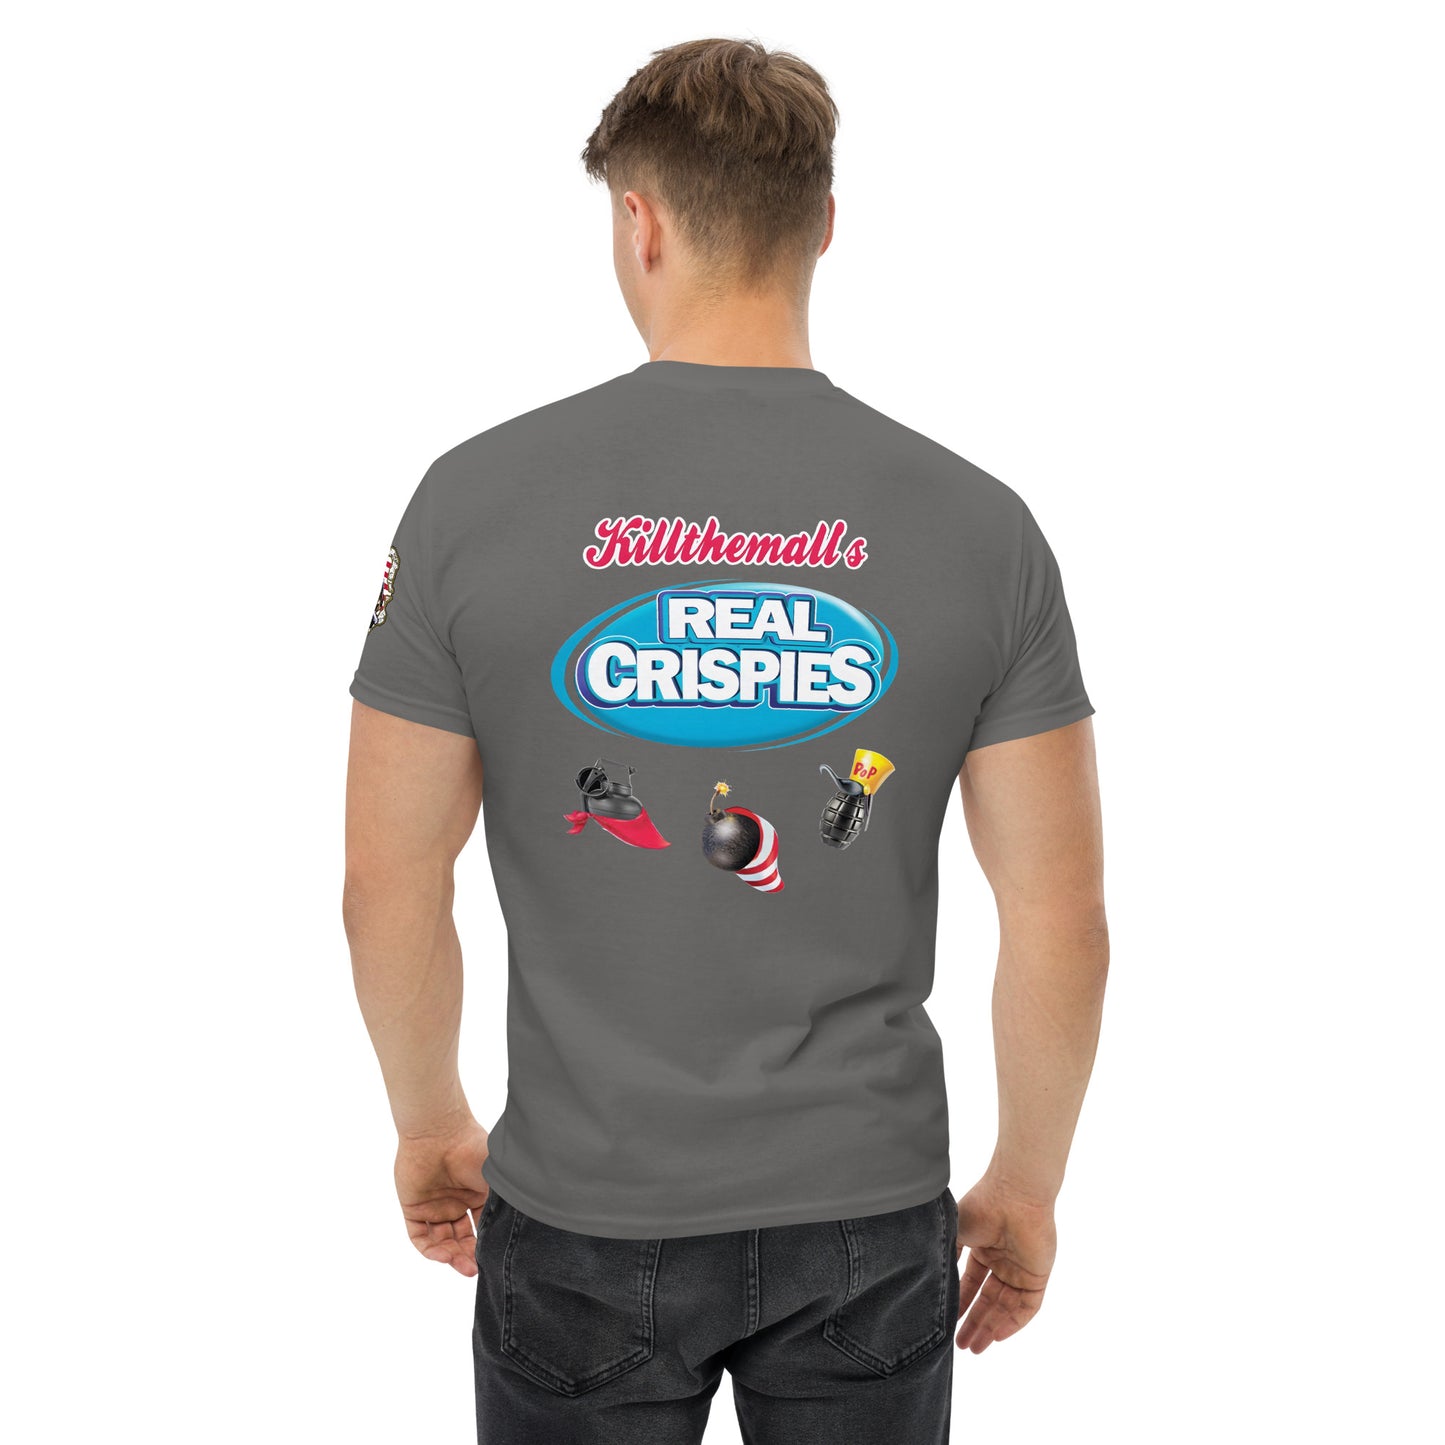 Real Crispies